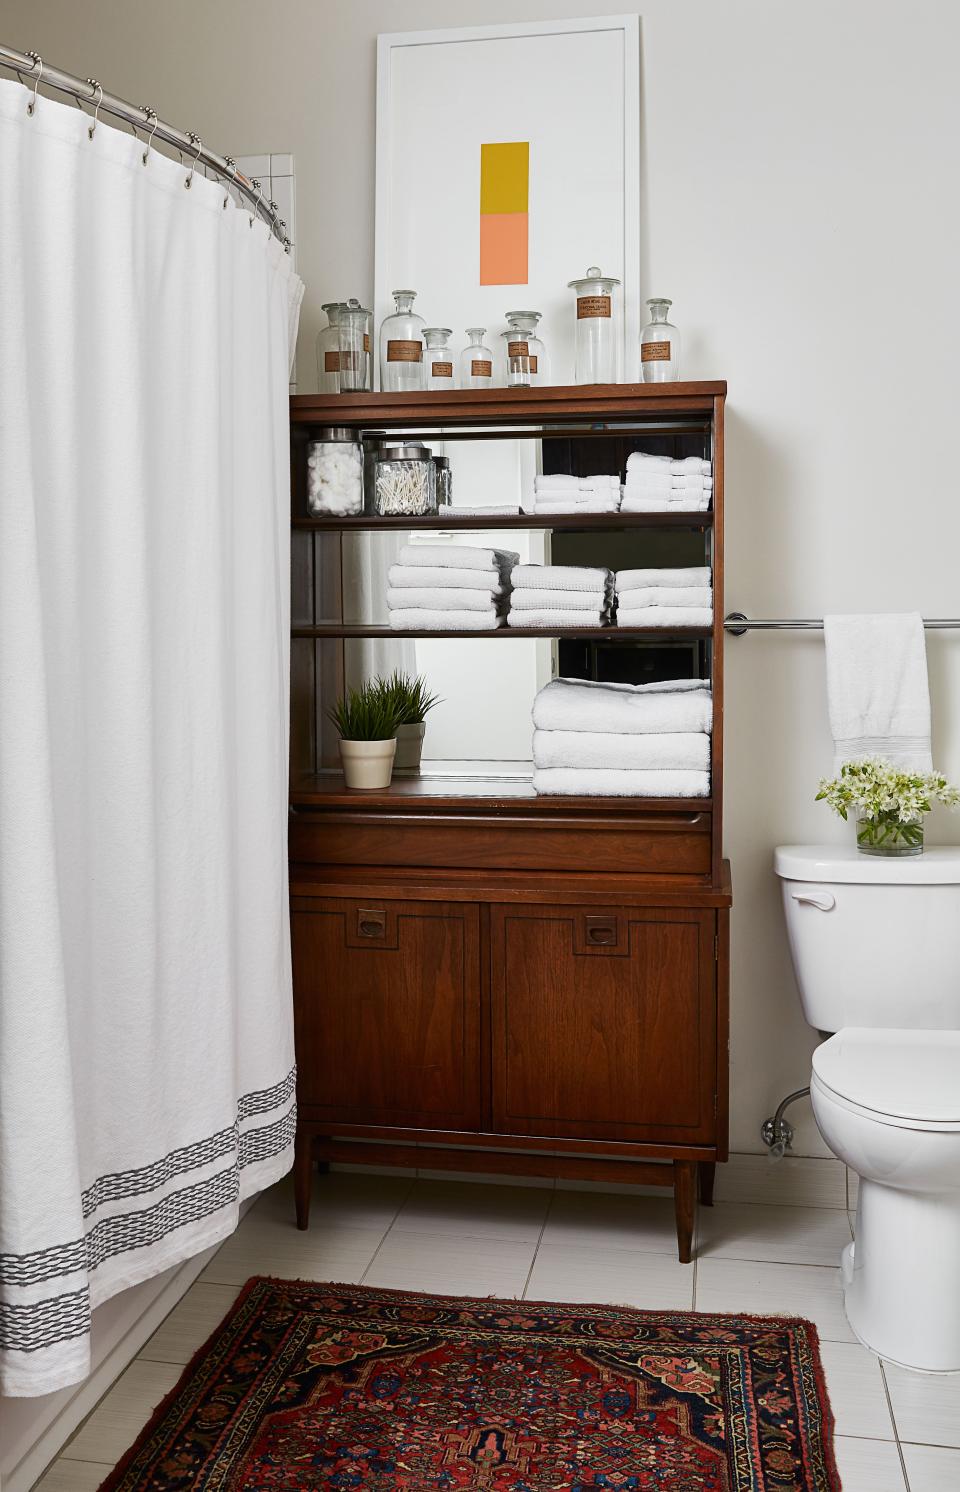 In Risdon’s bathroom, a cabinet purchased on eBay holds towels and vintage apothecary bottles. “That’s had three lives,” the designer says, pointing out that he previously used the piece as a bar, and before that as a china cabinet. Like the rest of the apartment, the bathroom displays Risdon’s flair for mixing old and new.